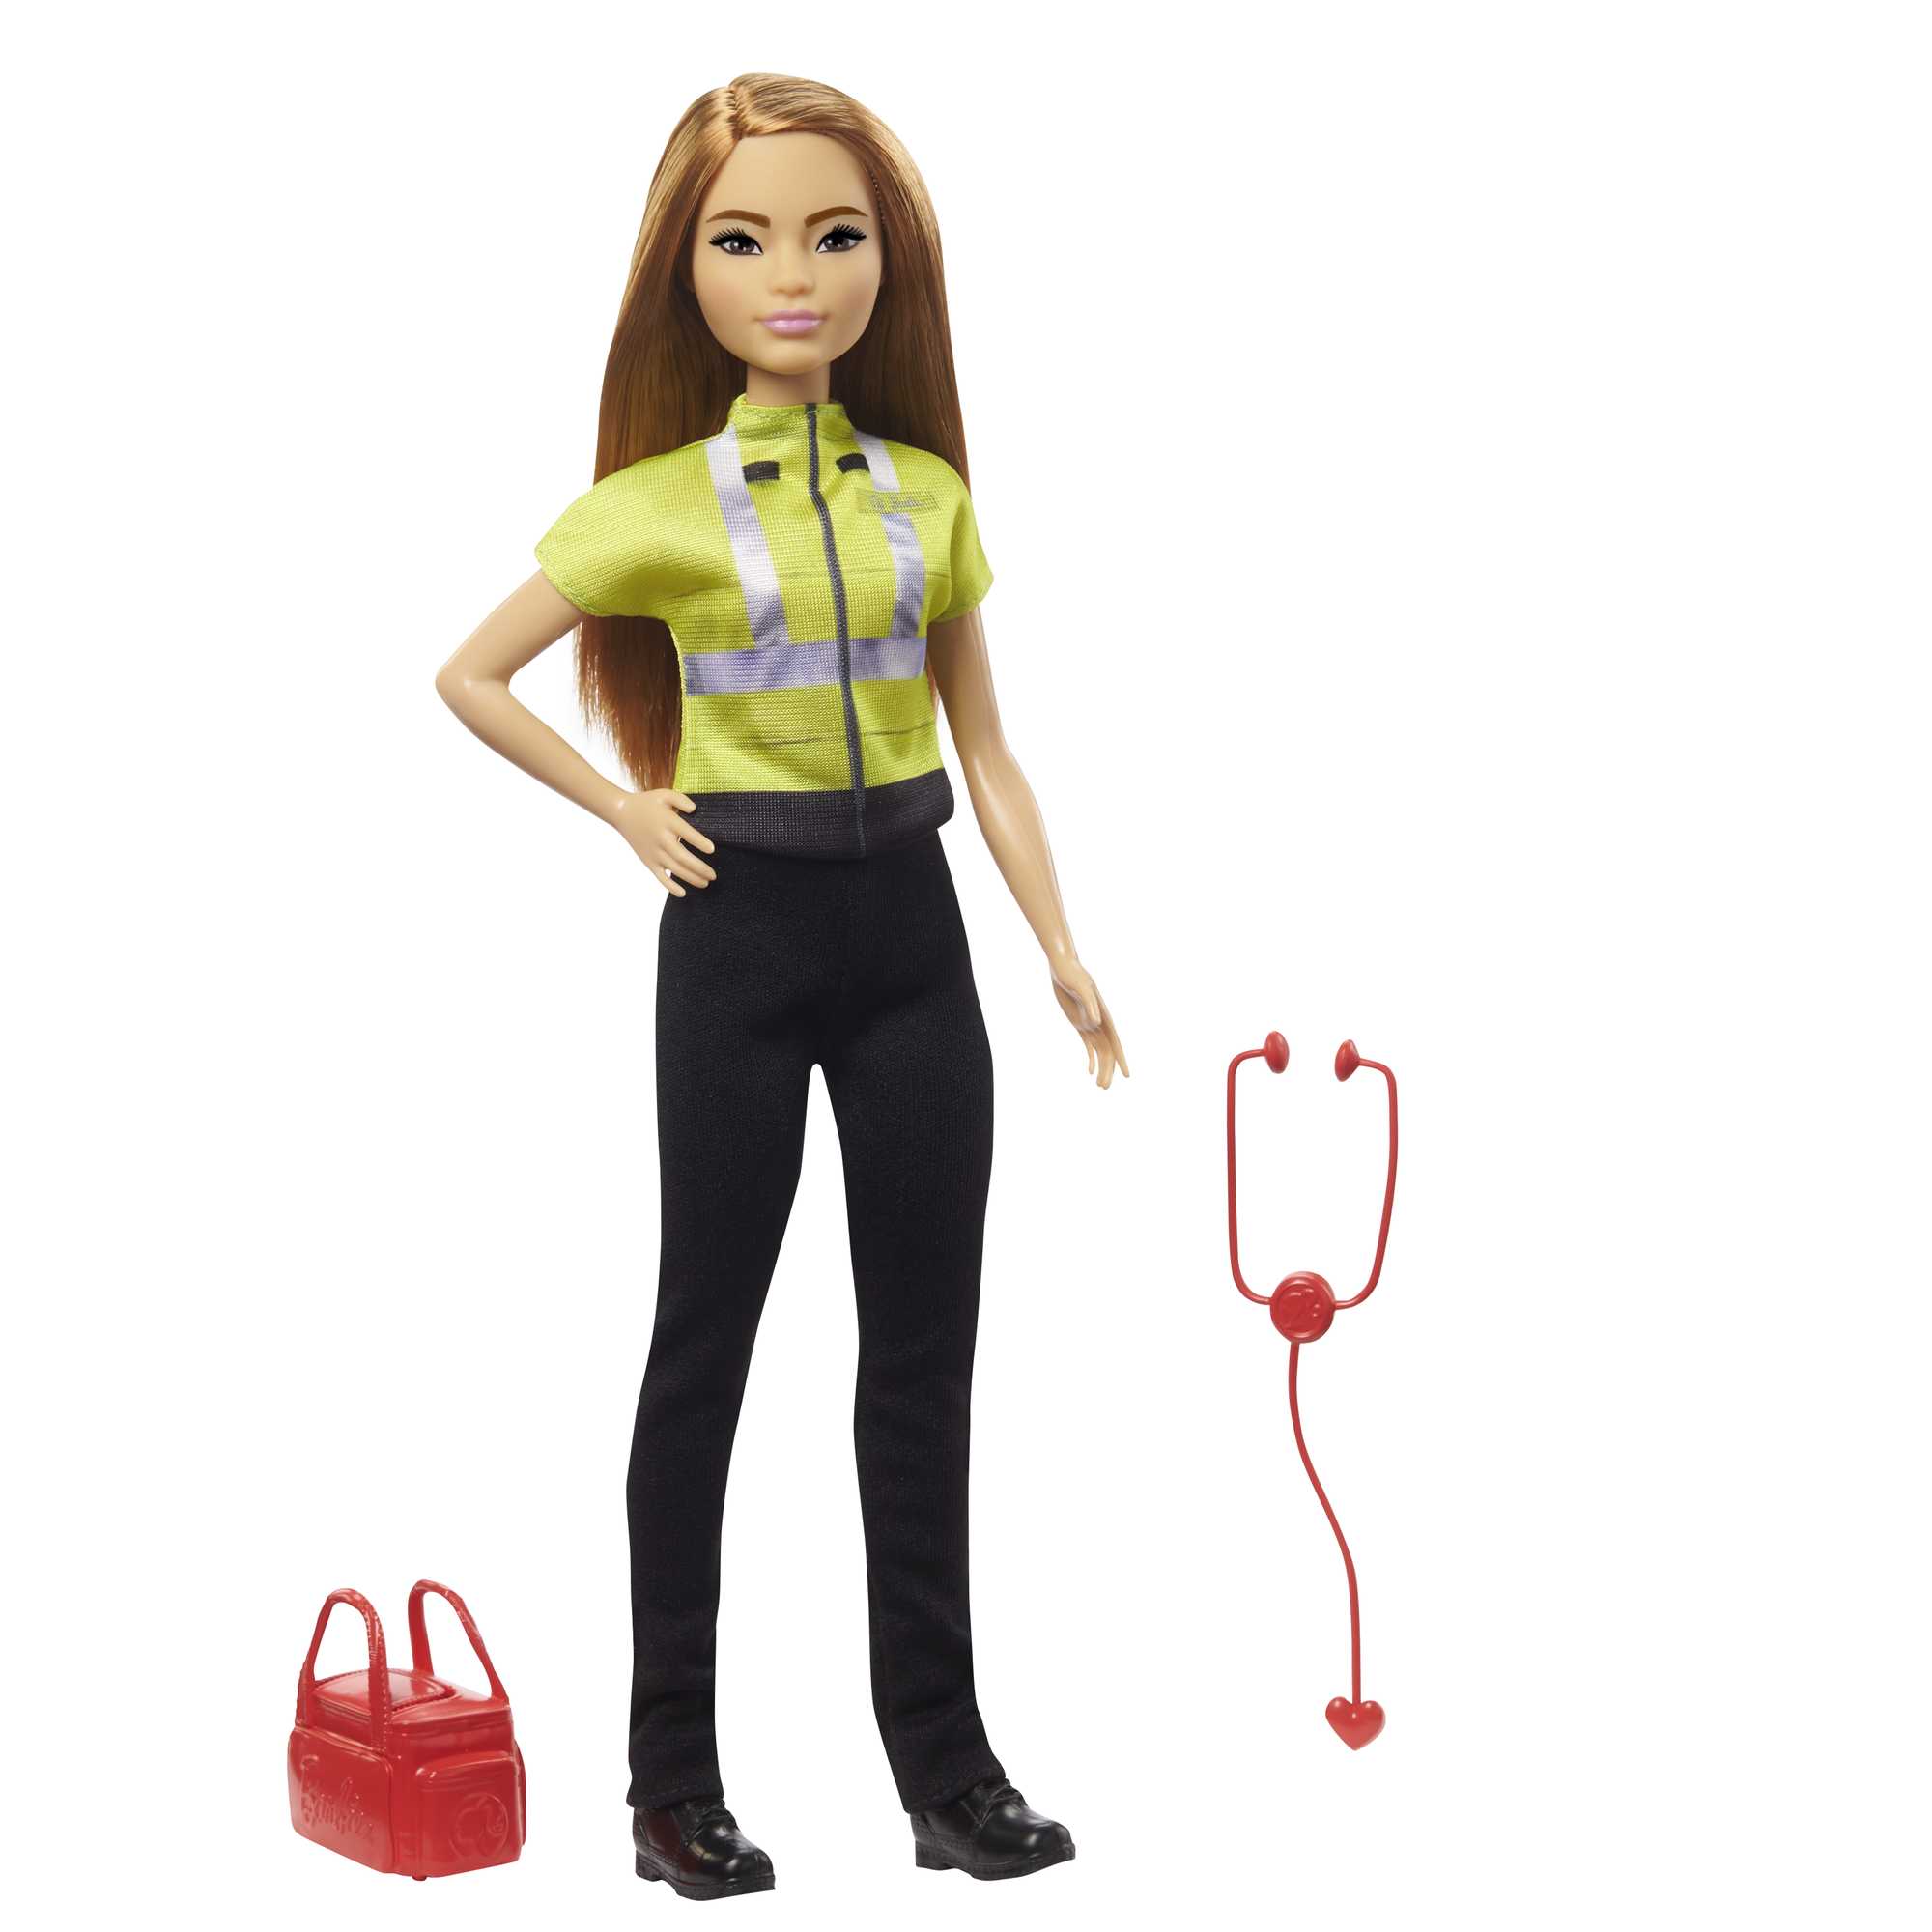 Barbie Paramedic Petite Fashion Doll with Brunette Hair, Stethoscope, Medical Bag & Accessories - image 1 of 6